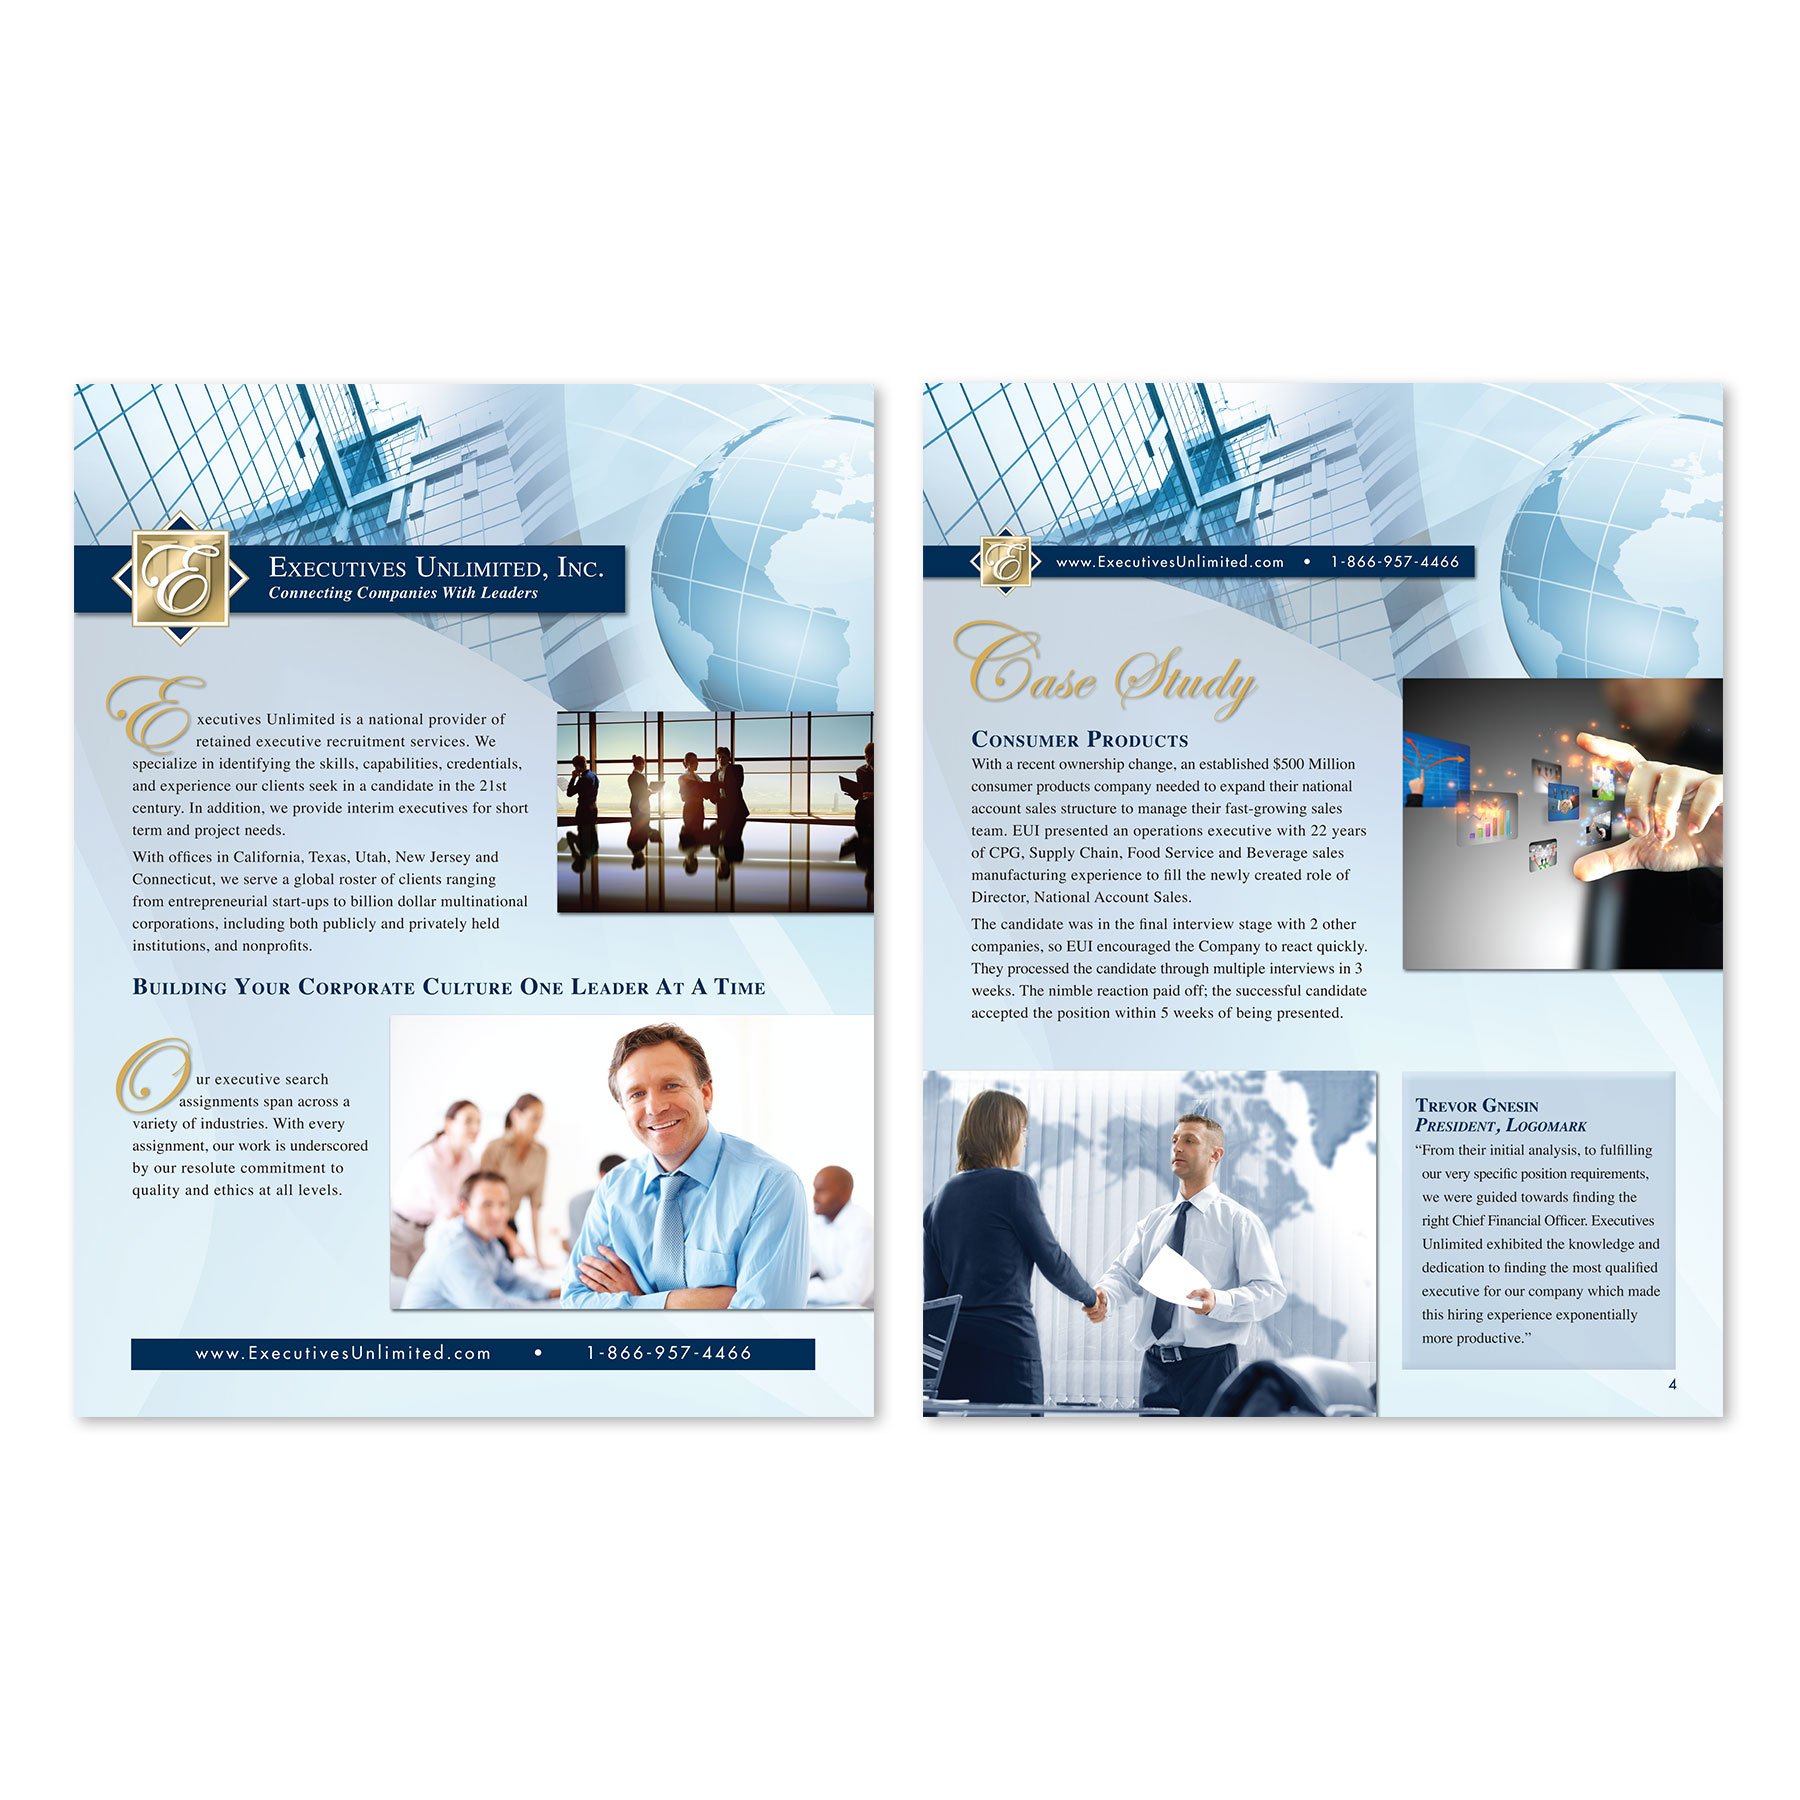 Executives Unlimited Online Brochure